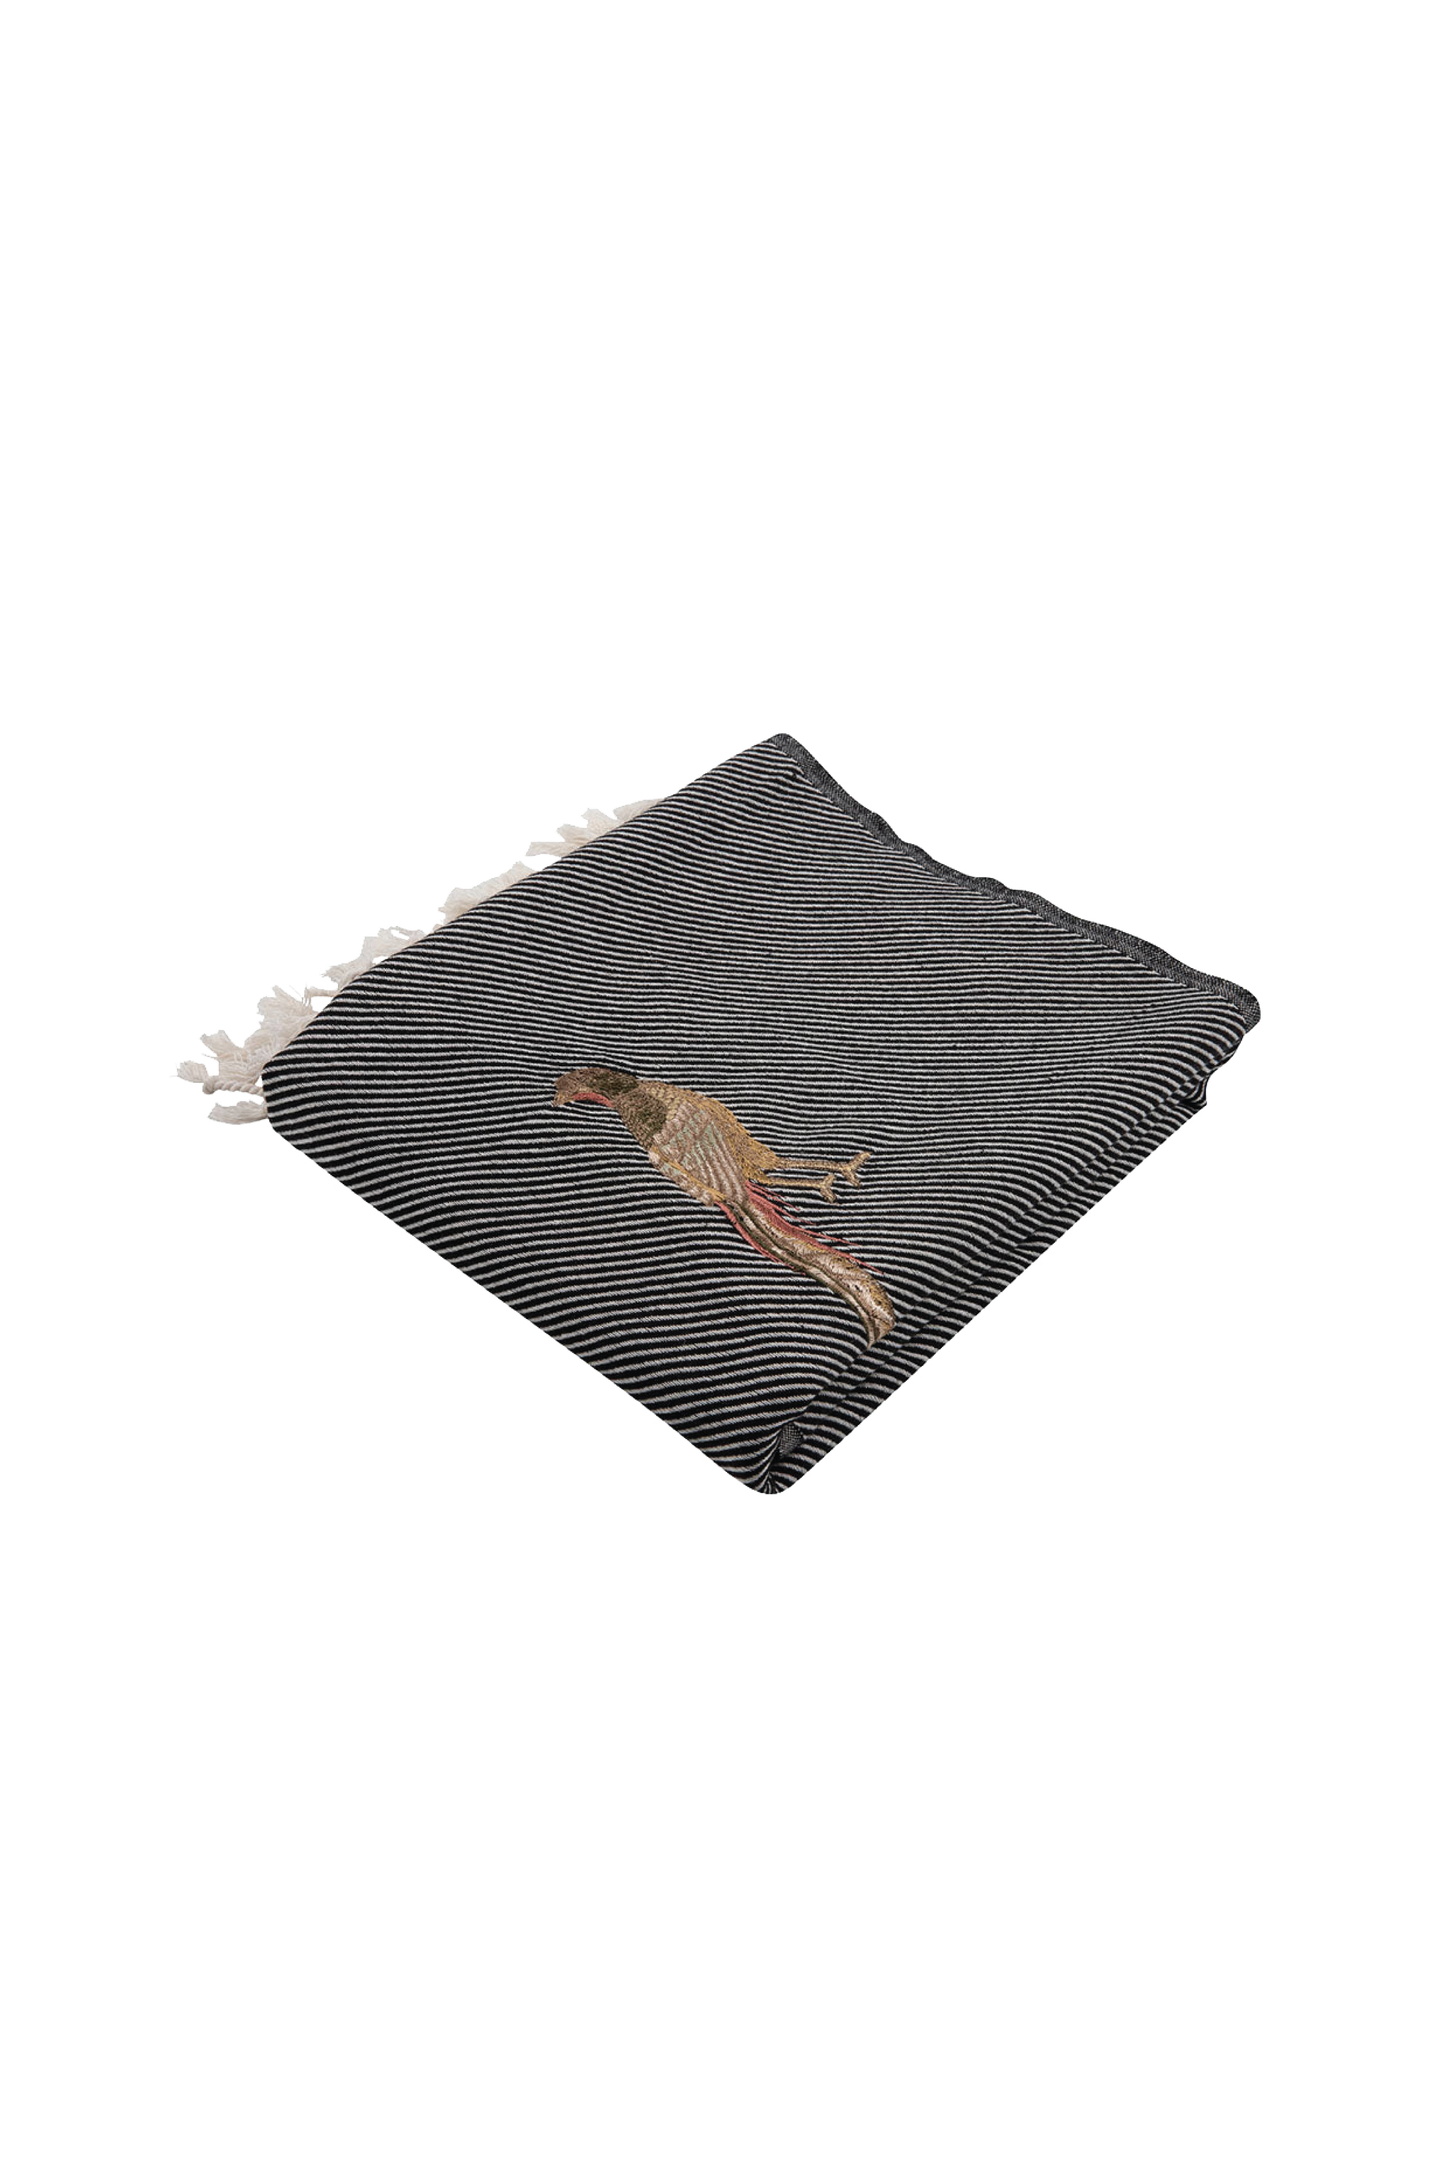 EMBROIDERED HAMMAM TOWEL |  THE PHEASANT IN BLACK